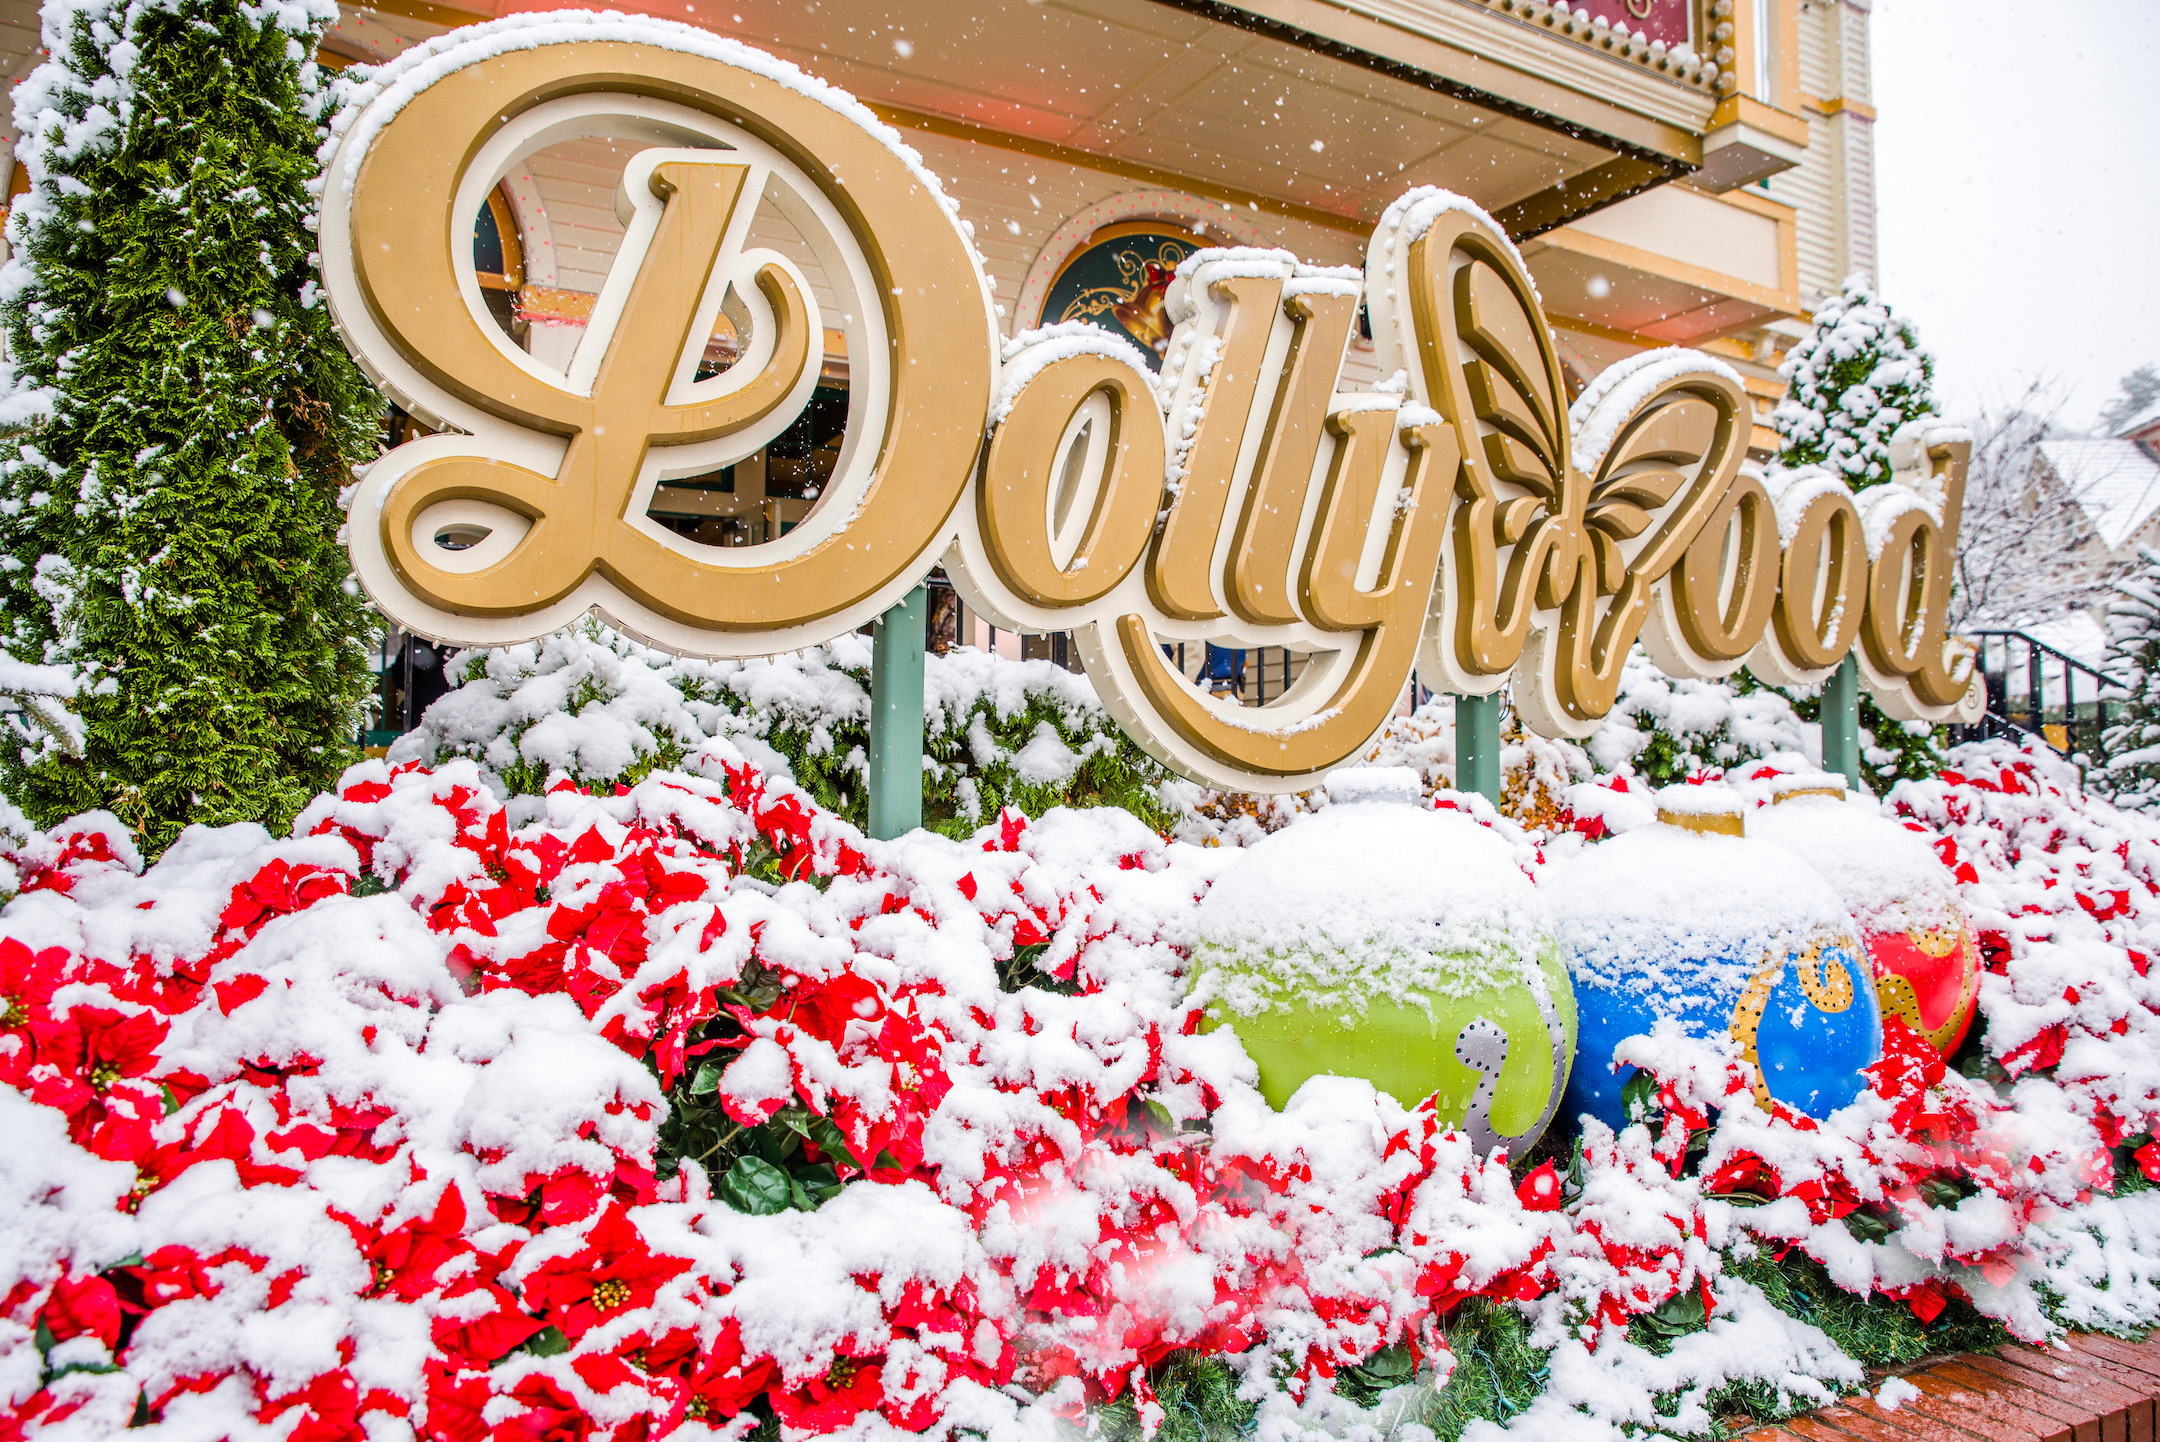 Dollywood sign bedecked in Christmas decorations.